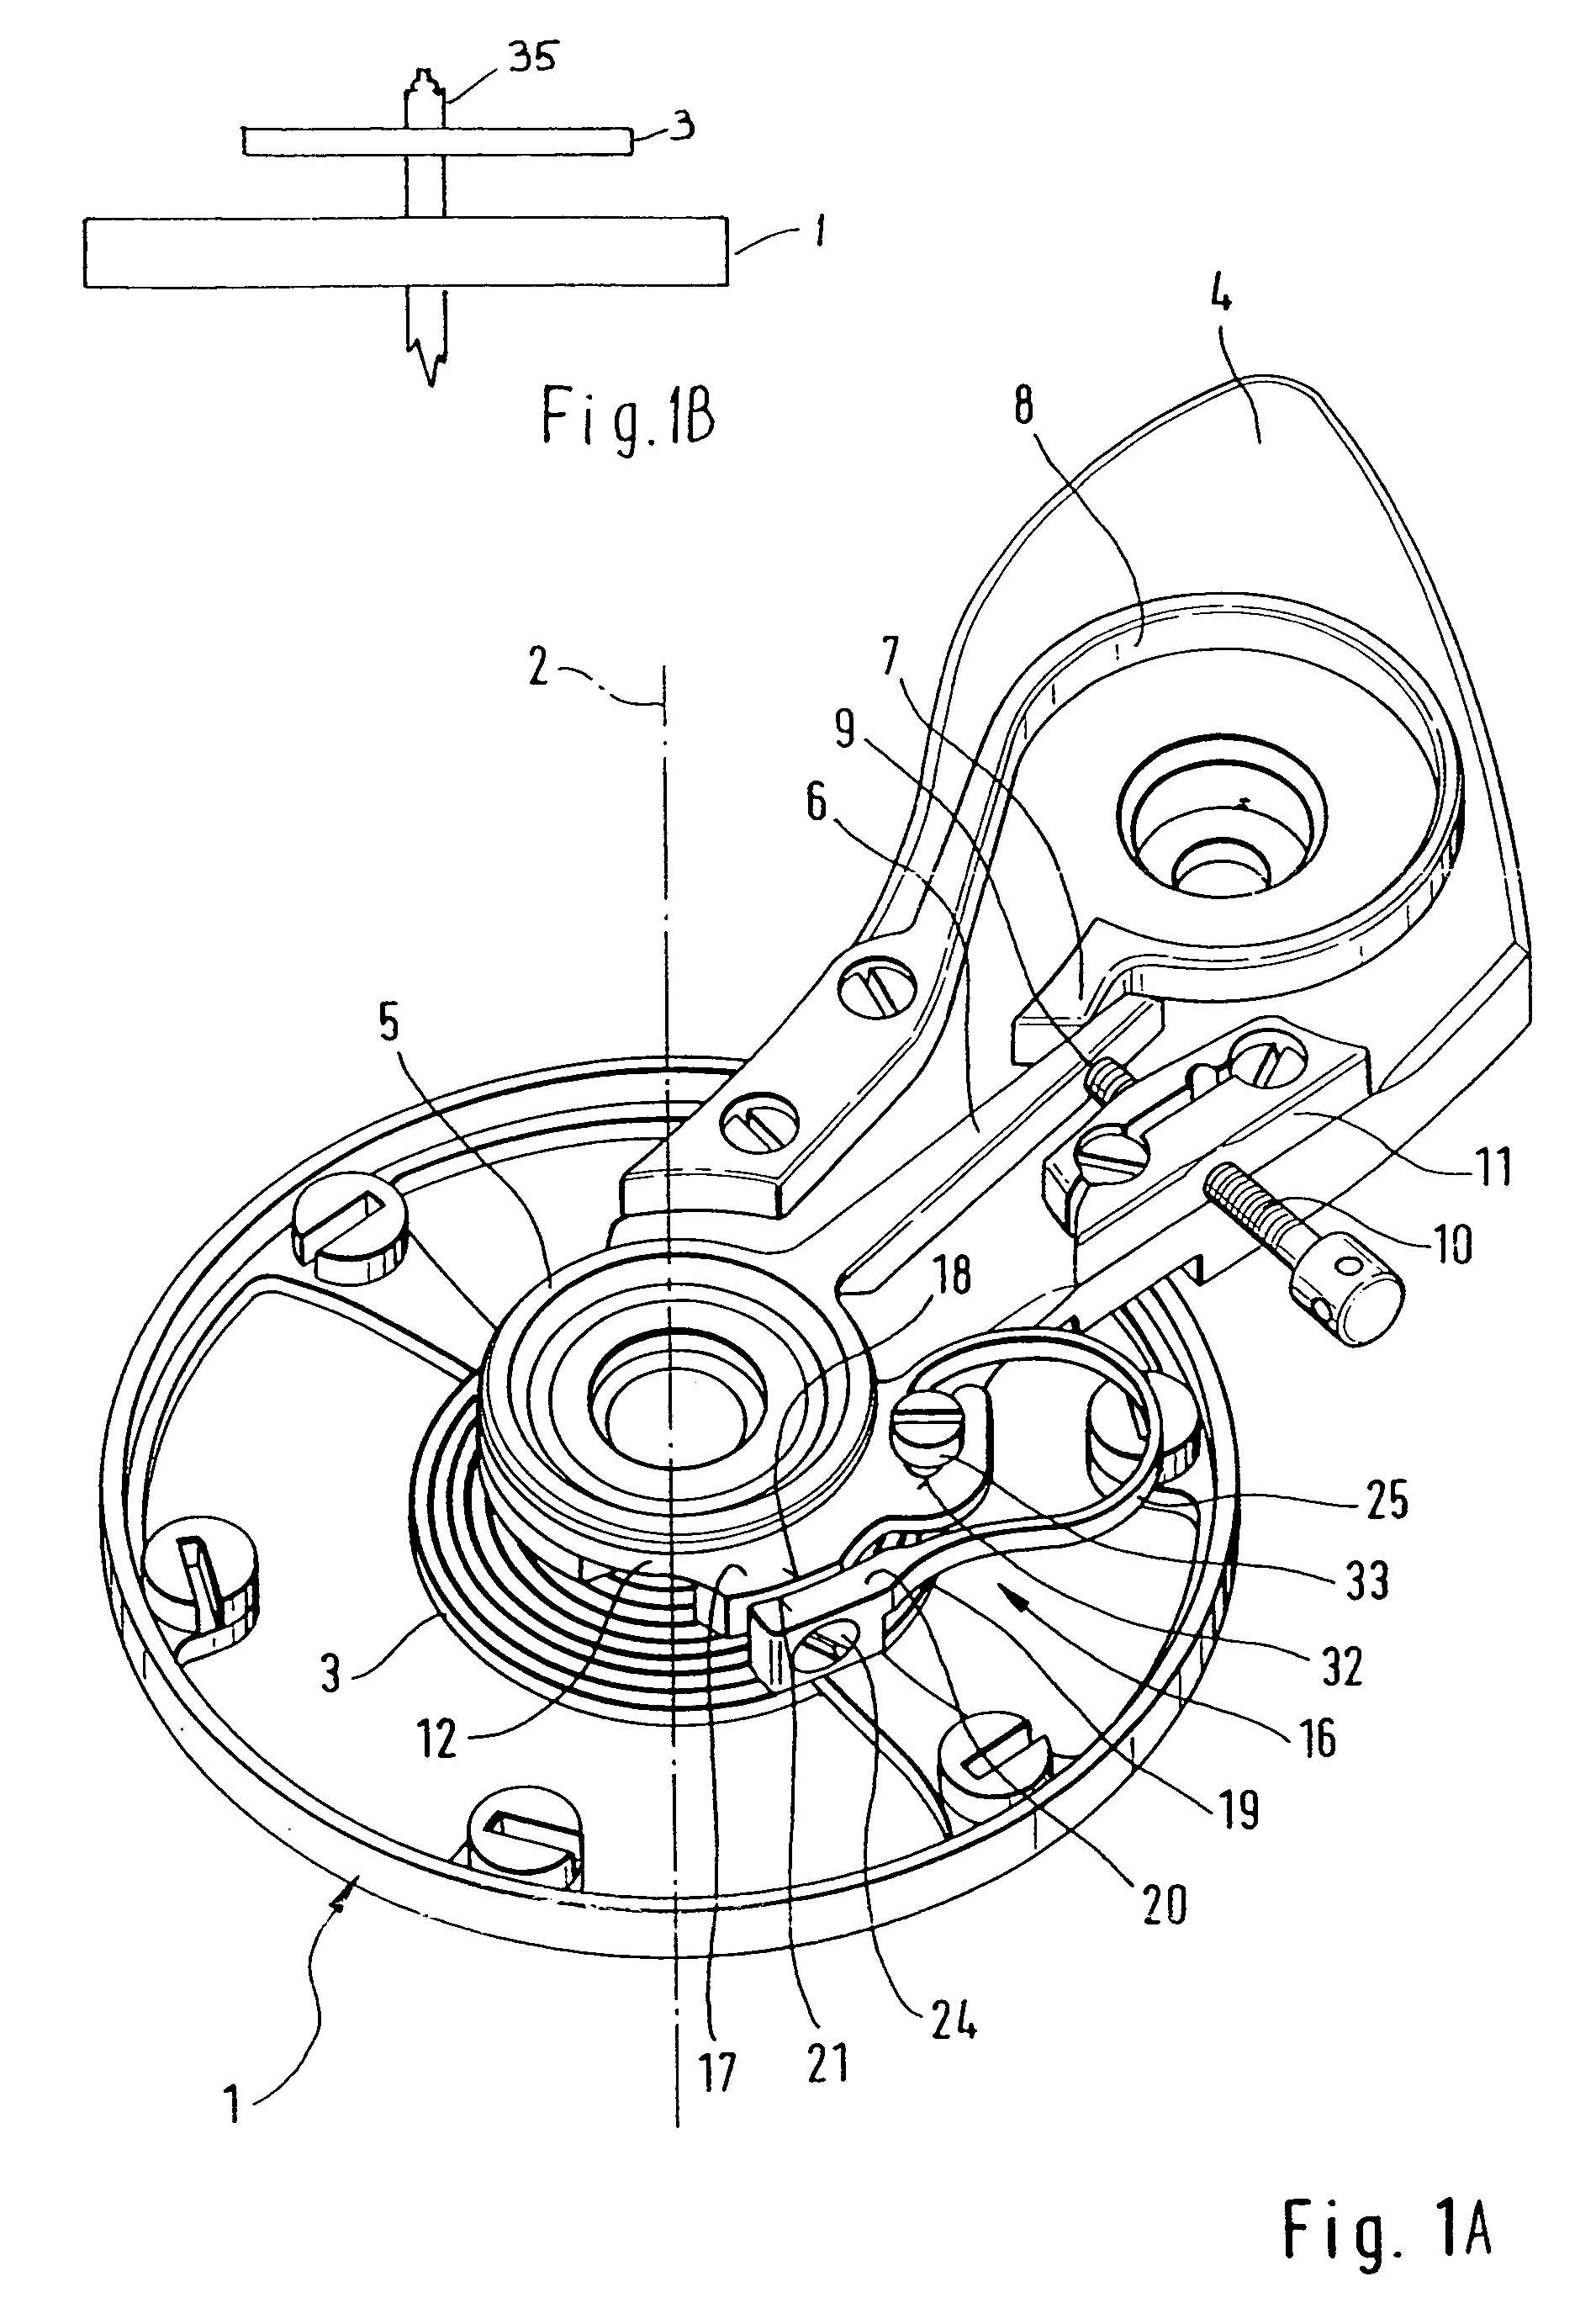 Oscillating system for mechanical timepiece